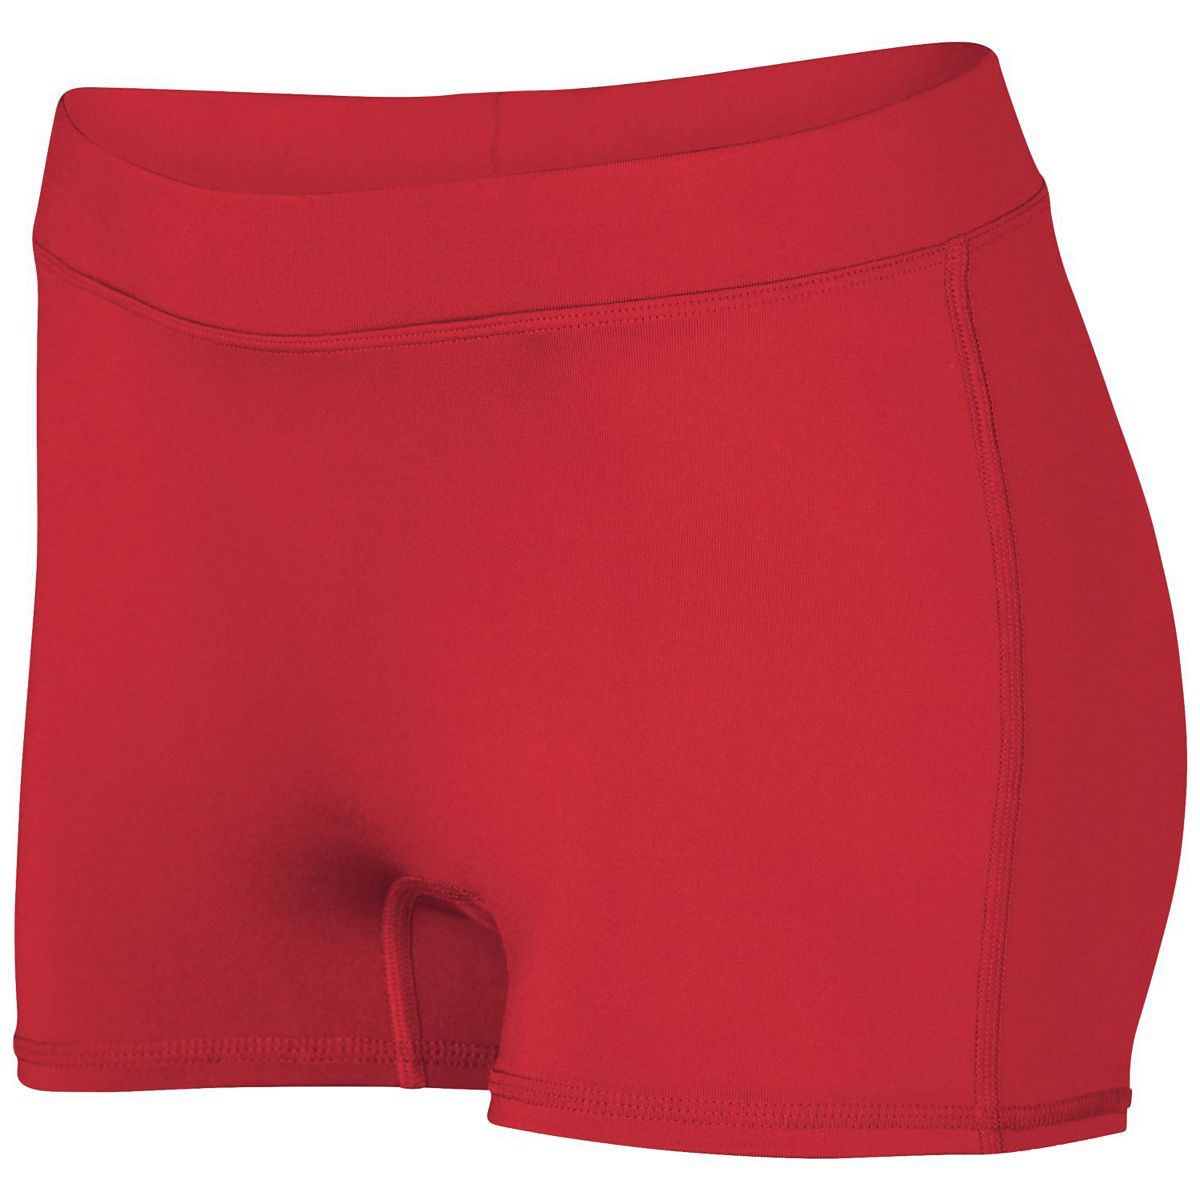 Augusta Sportswear Ladies Dare Shorts in Red  -Part of the Ladies, Ladies-Shorts, Augusta-Products, Volleyball product lines at KanaleyCreations.com